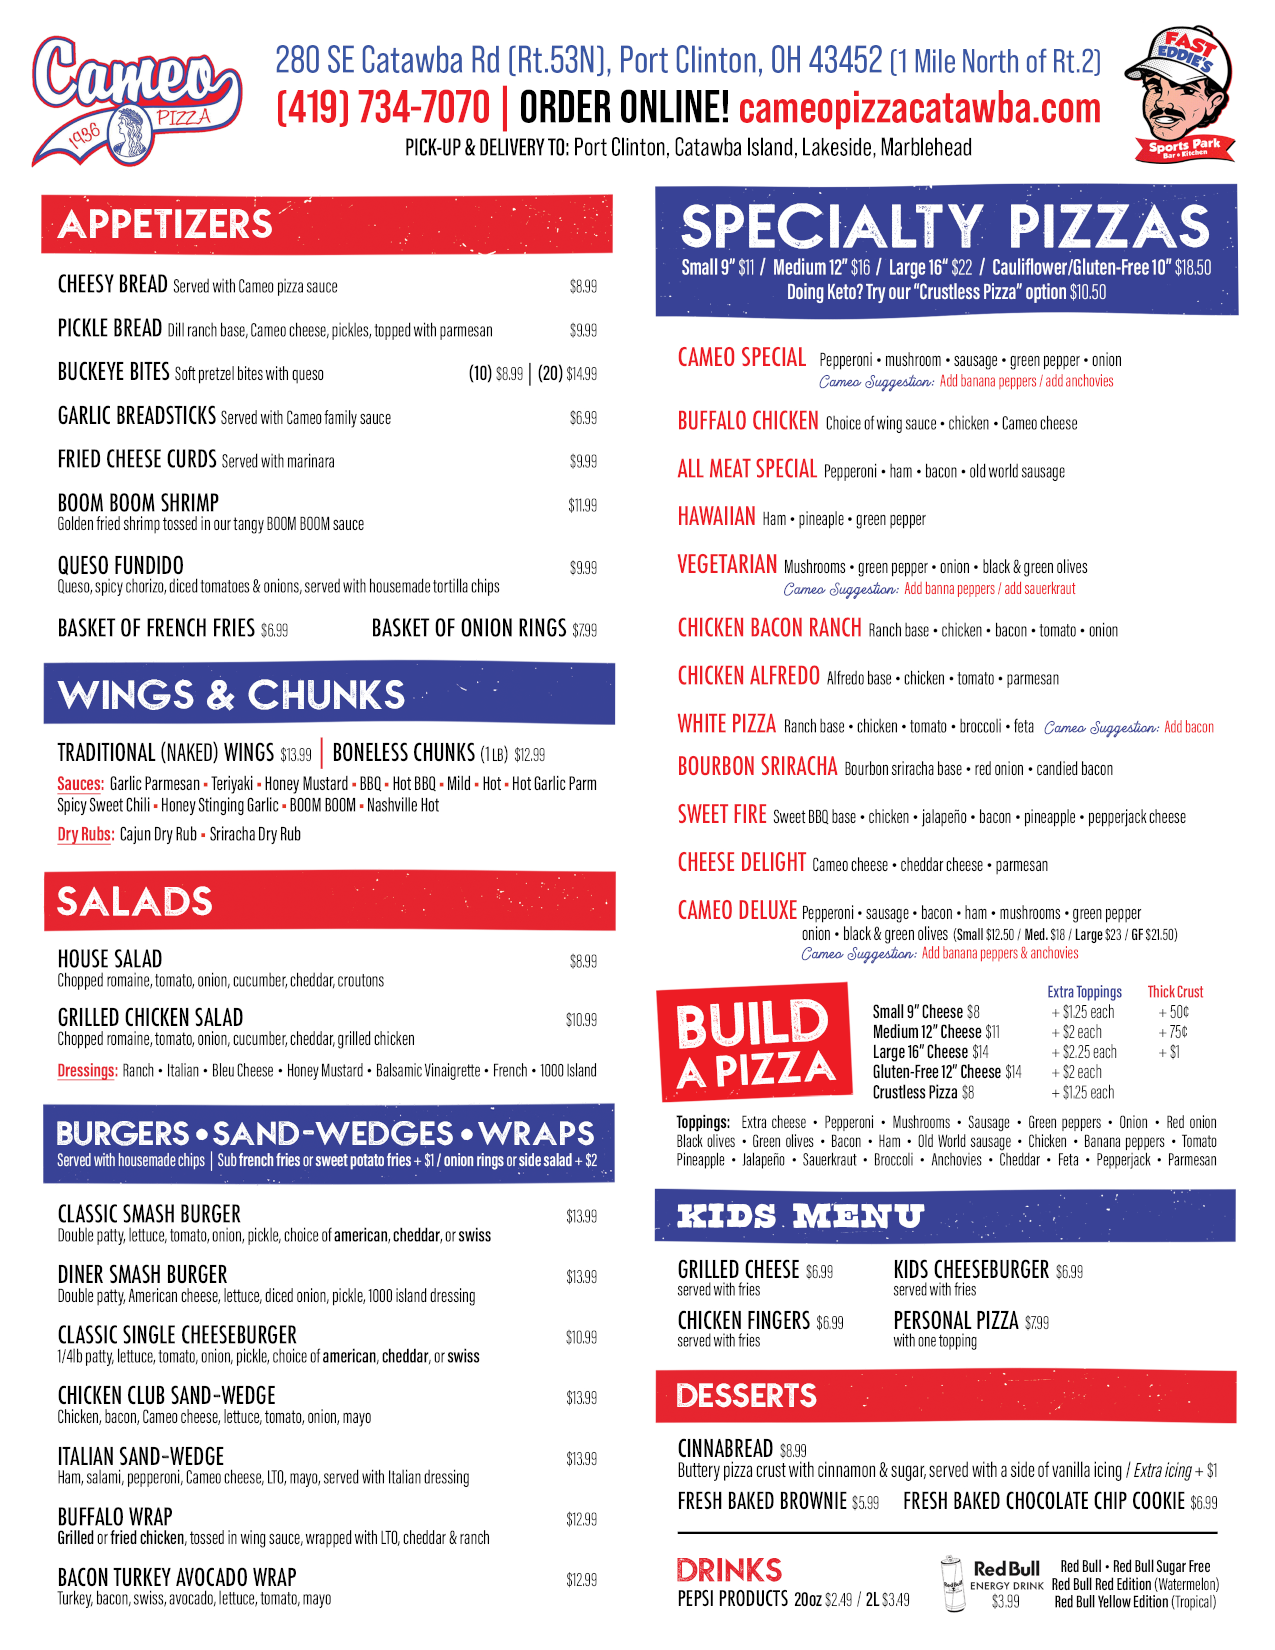 Cameo's/Fast Eddies Delivery/Carry-Out Menu Side 1 - Catawba, Ohio